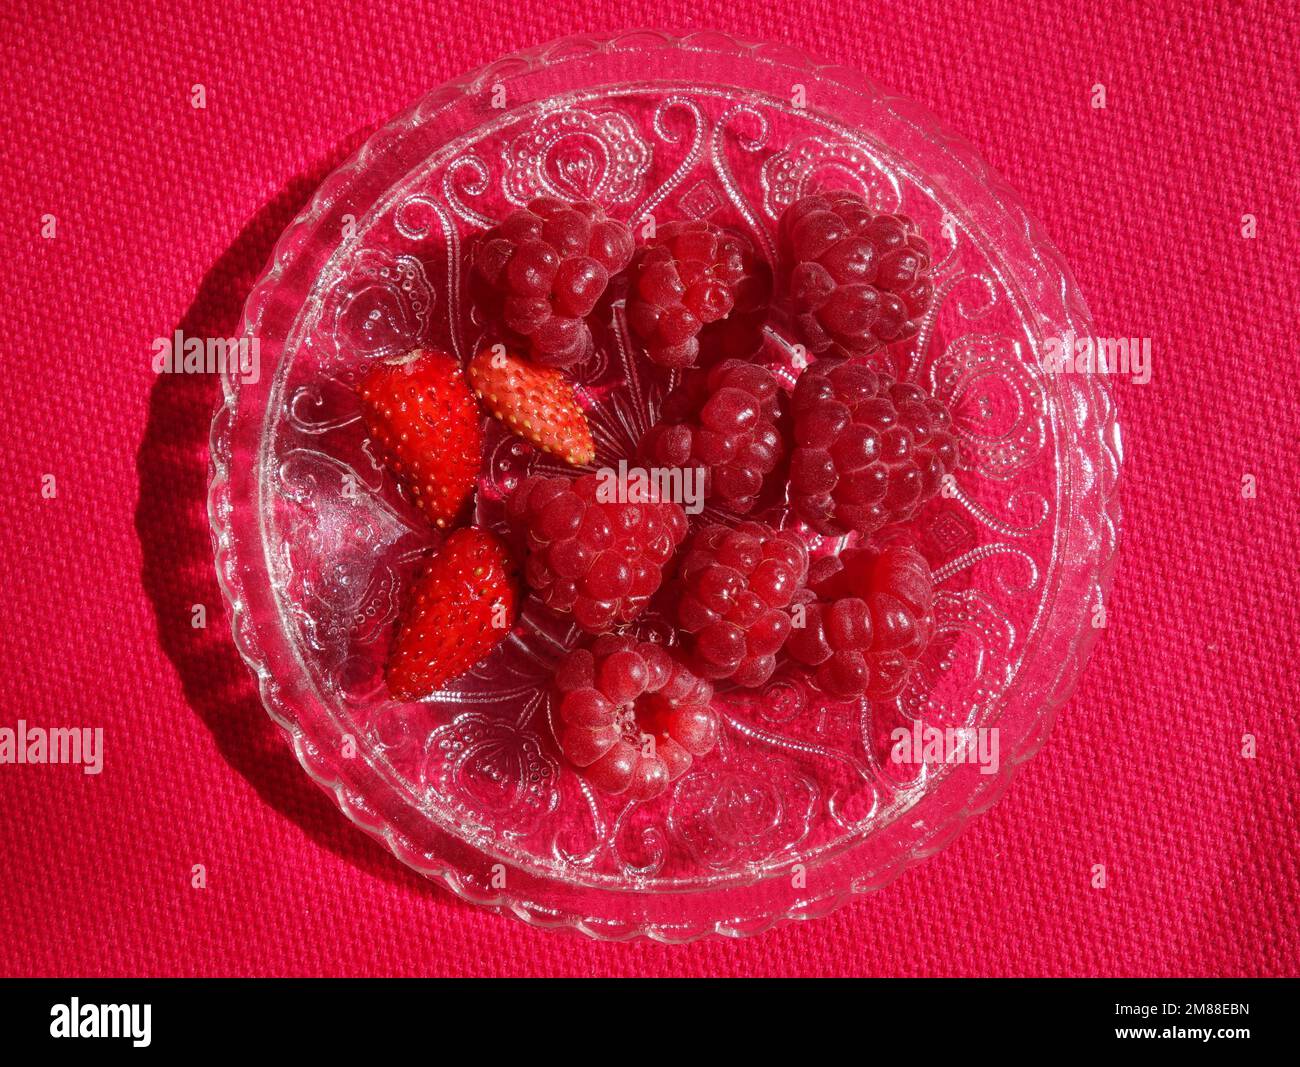 resh raspberries and strawberries fruits healthy snack. Heap of red berries on ornamented glass saucer on magenta cloth Stock Photo